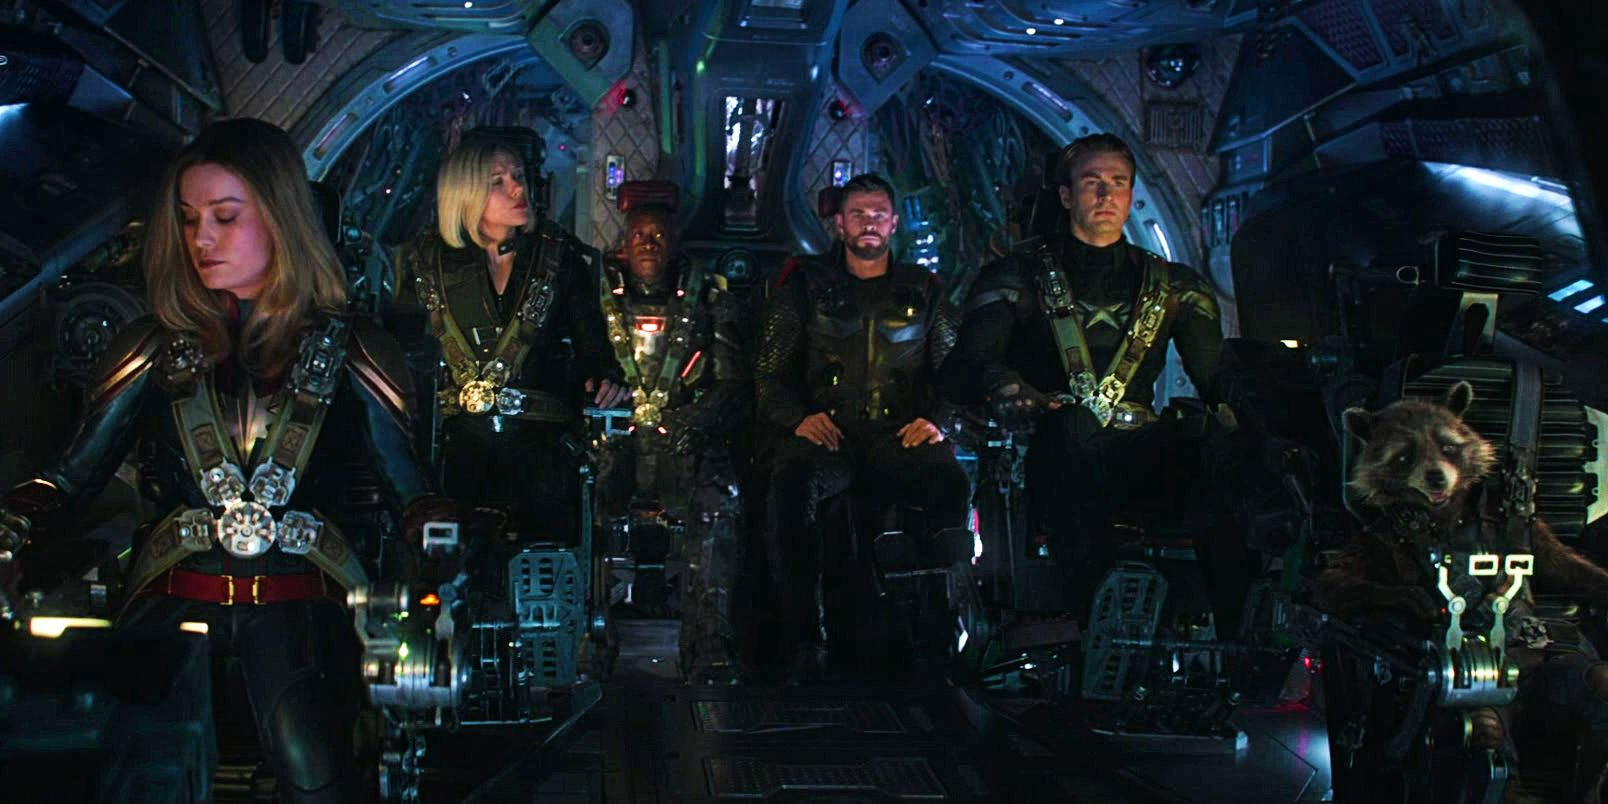 The Avengers go to space in Avengers Endgame